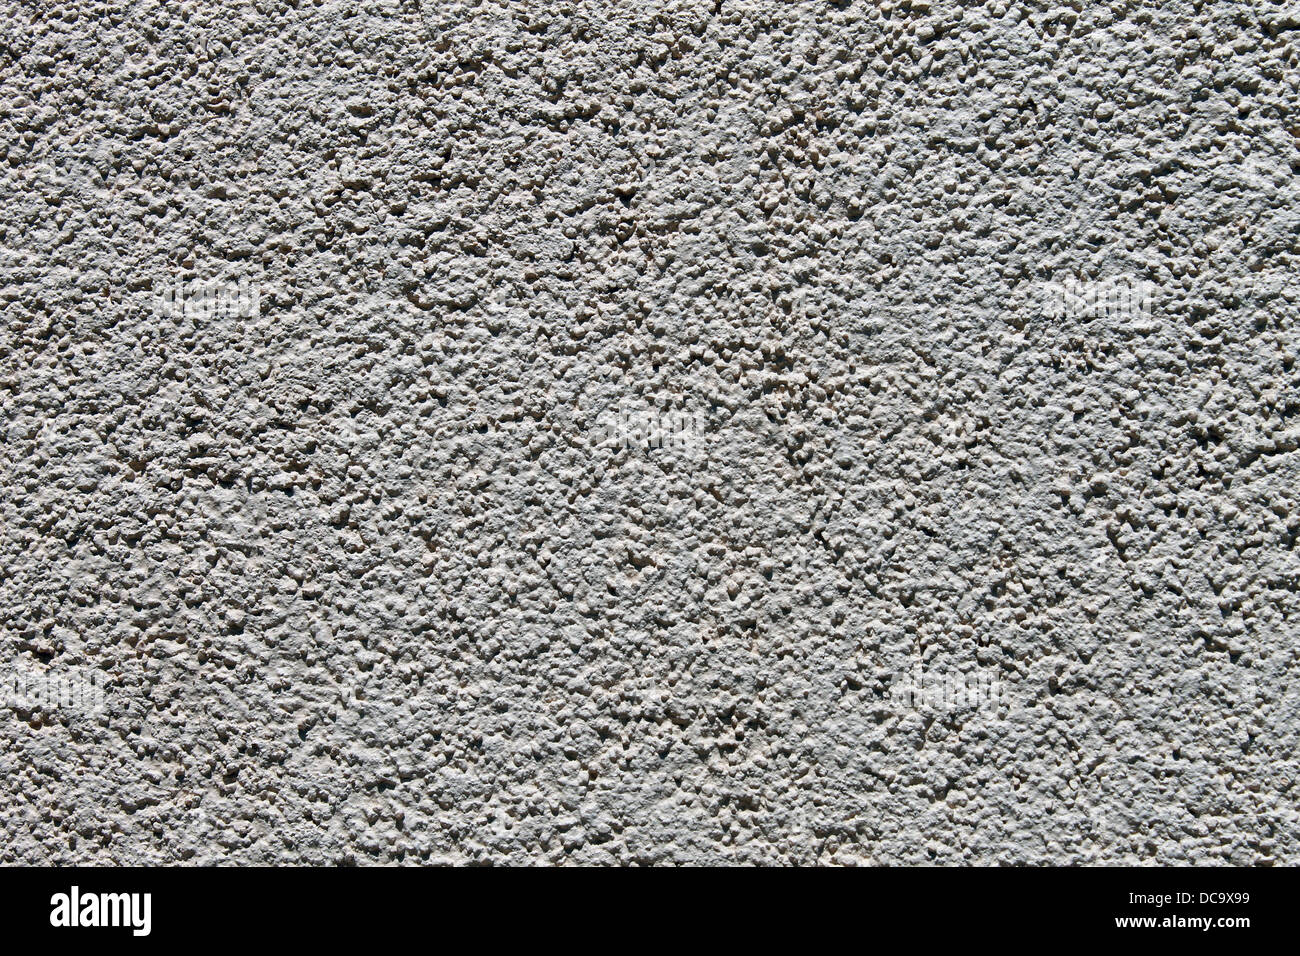 Closeup of abstract textured stone background. Stock Photo